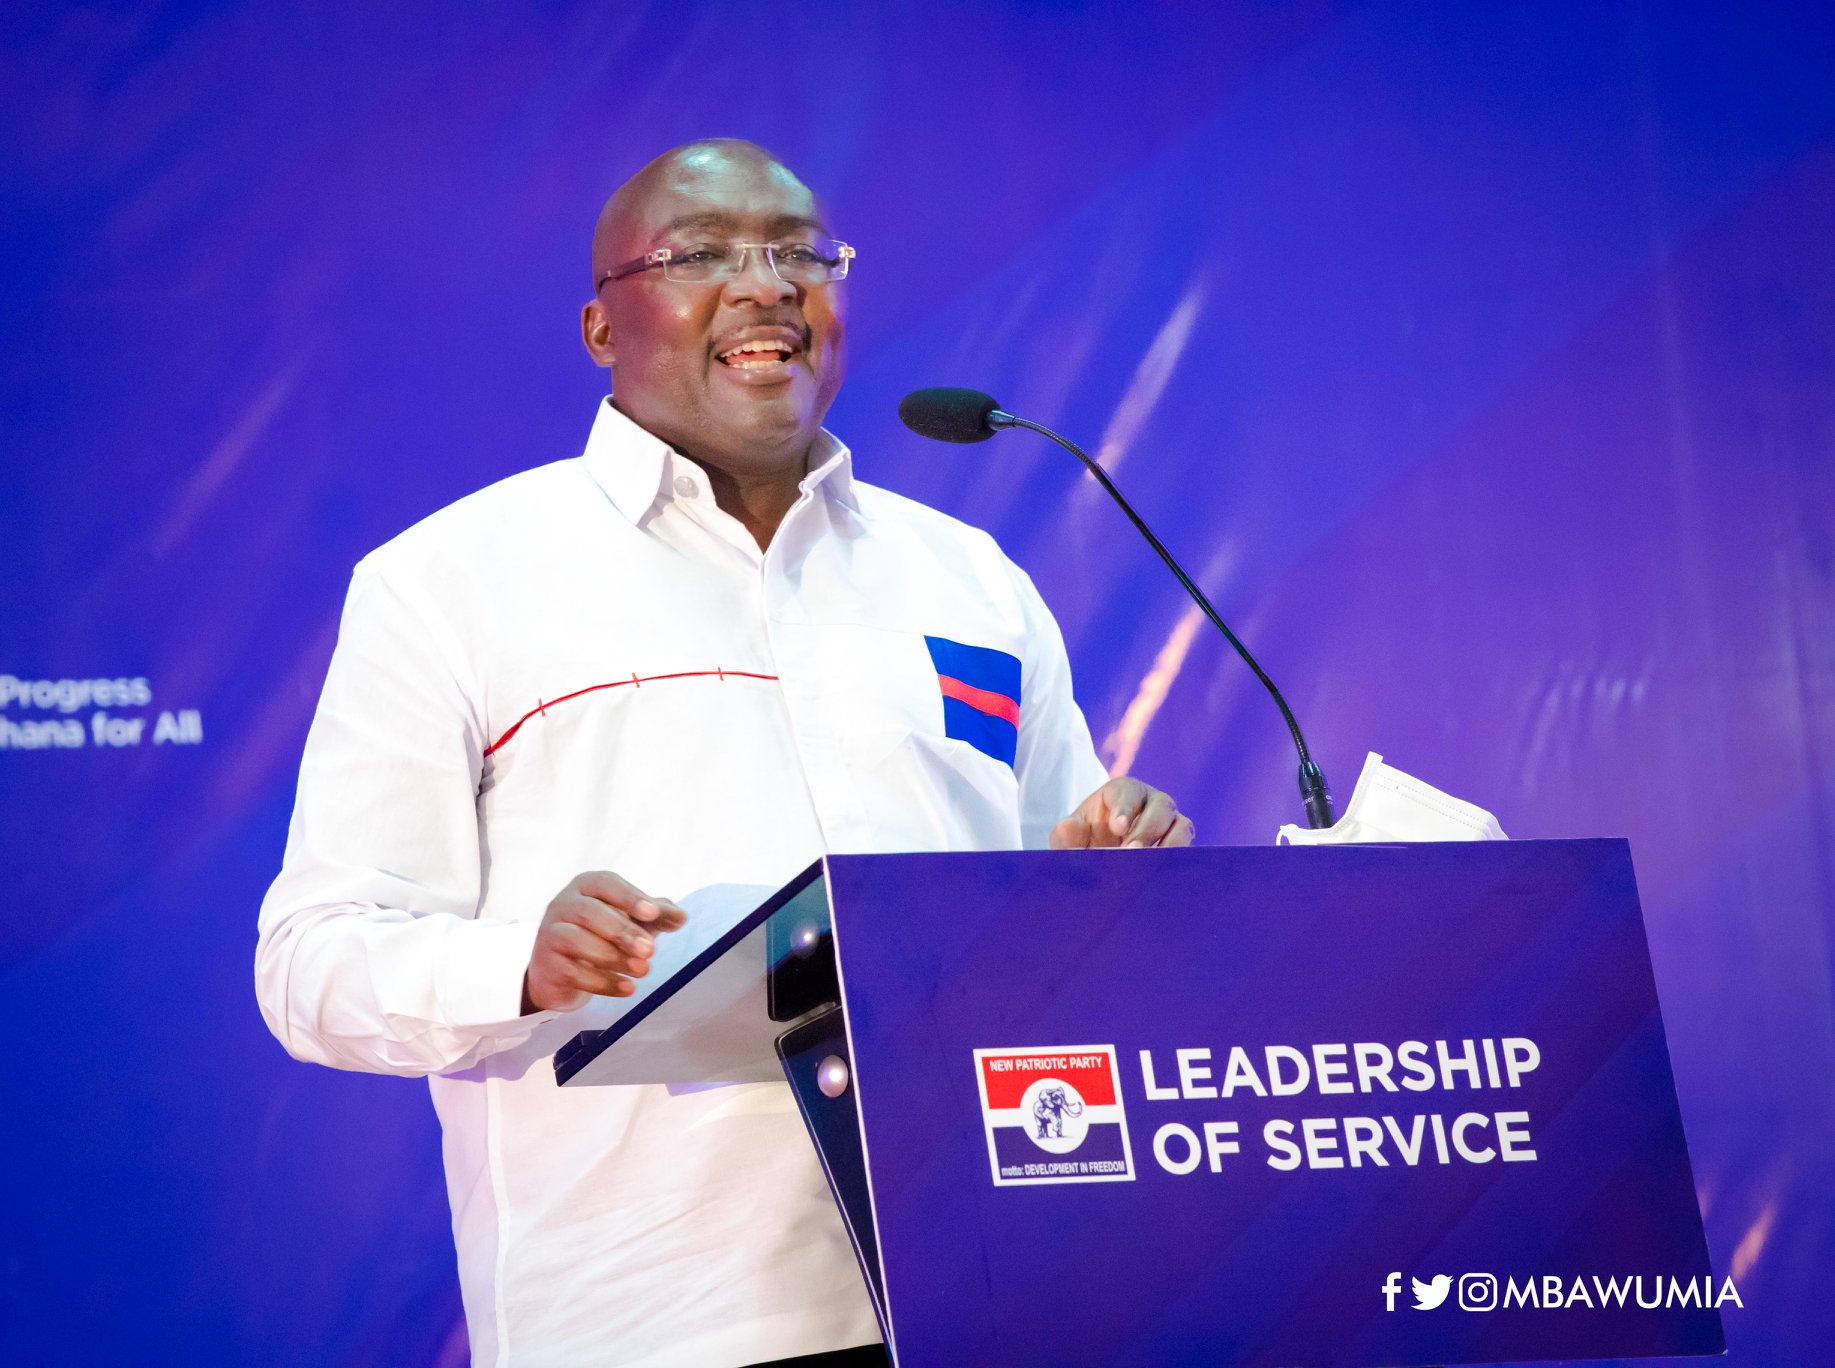 Bawumia’s VP choice: the seasoned, stolid and serious Dr Opoku Prempeh